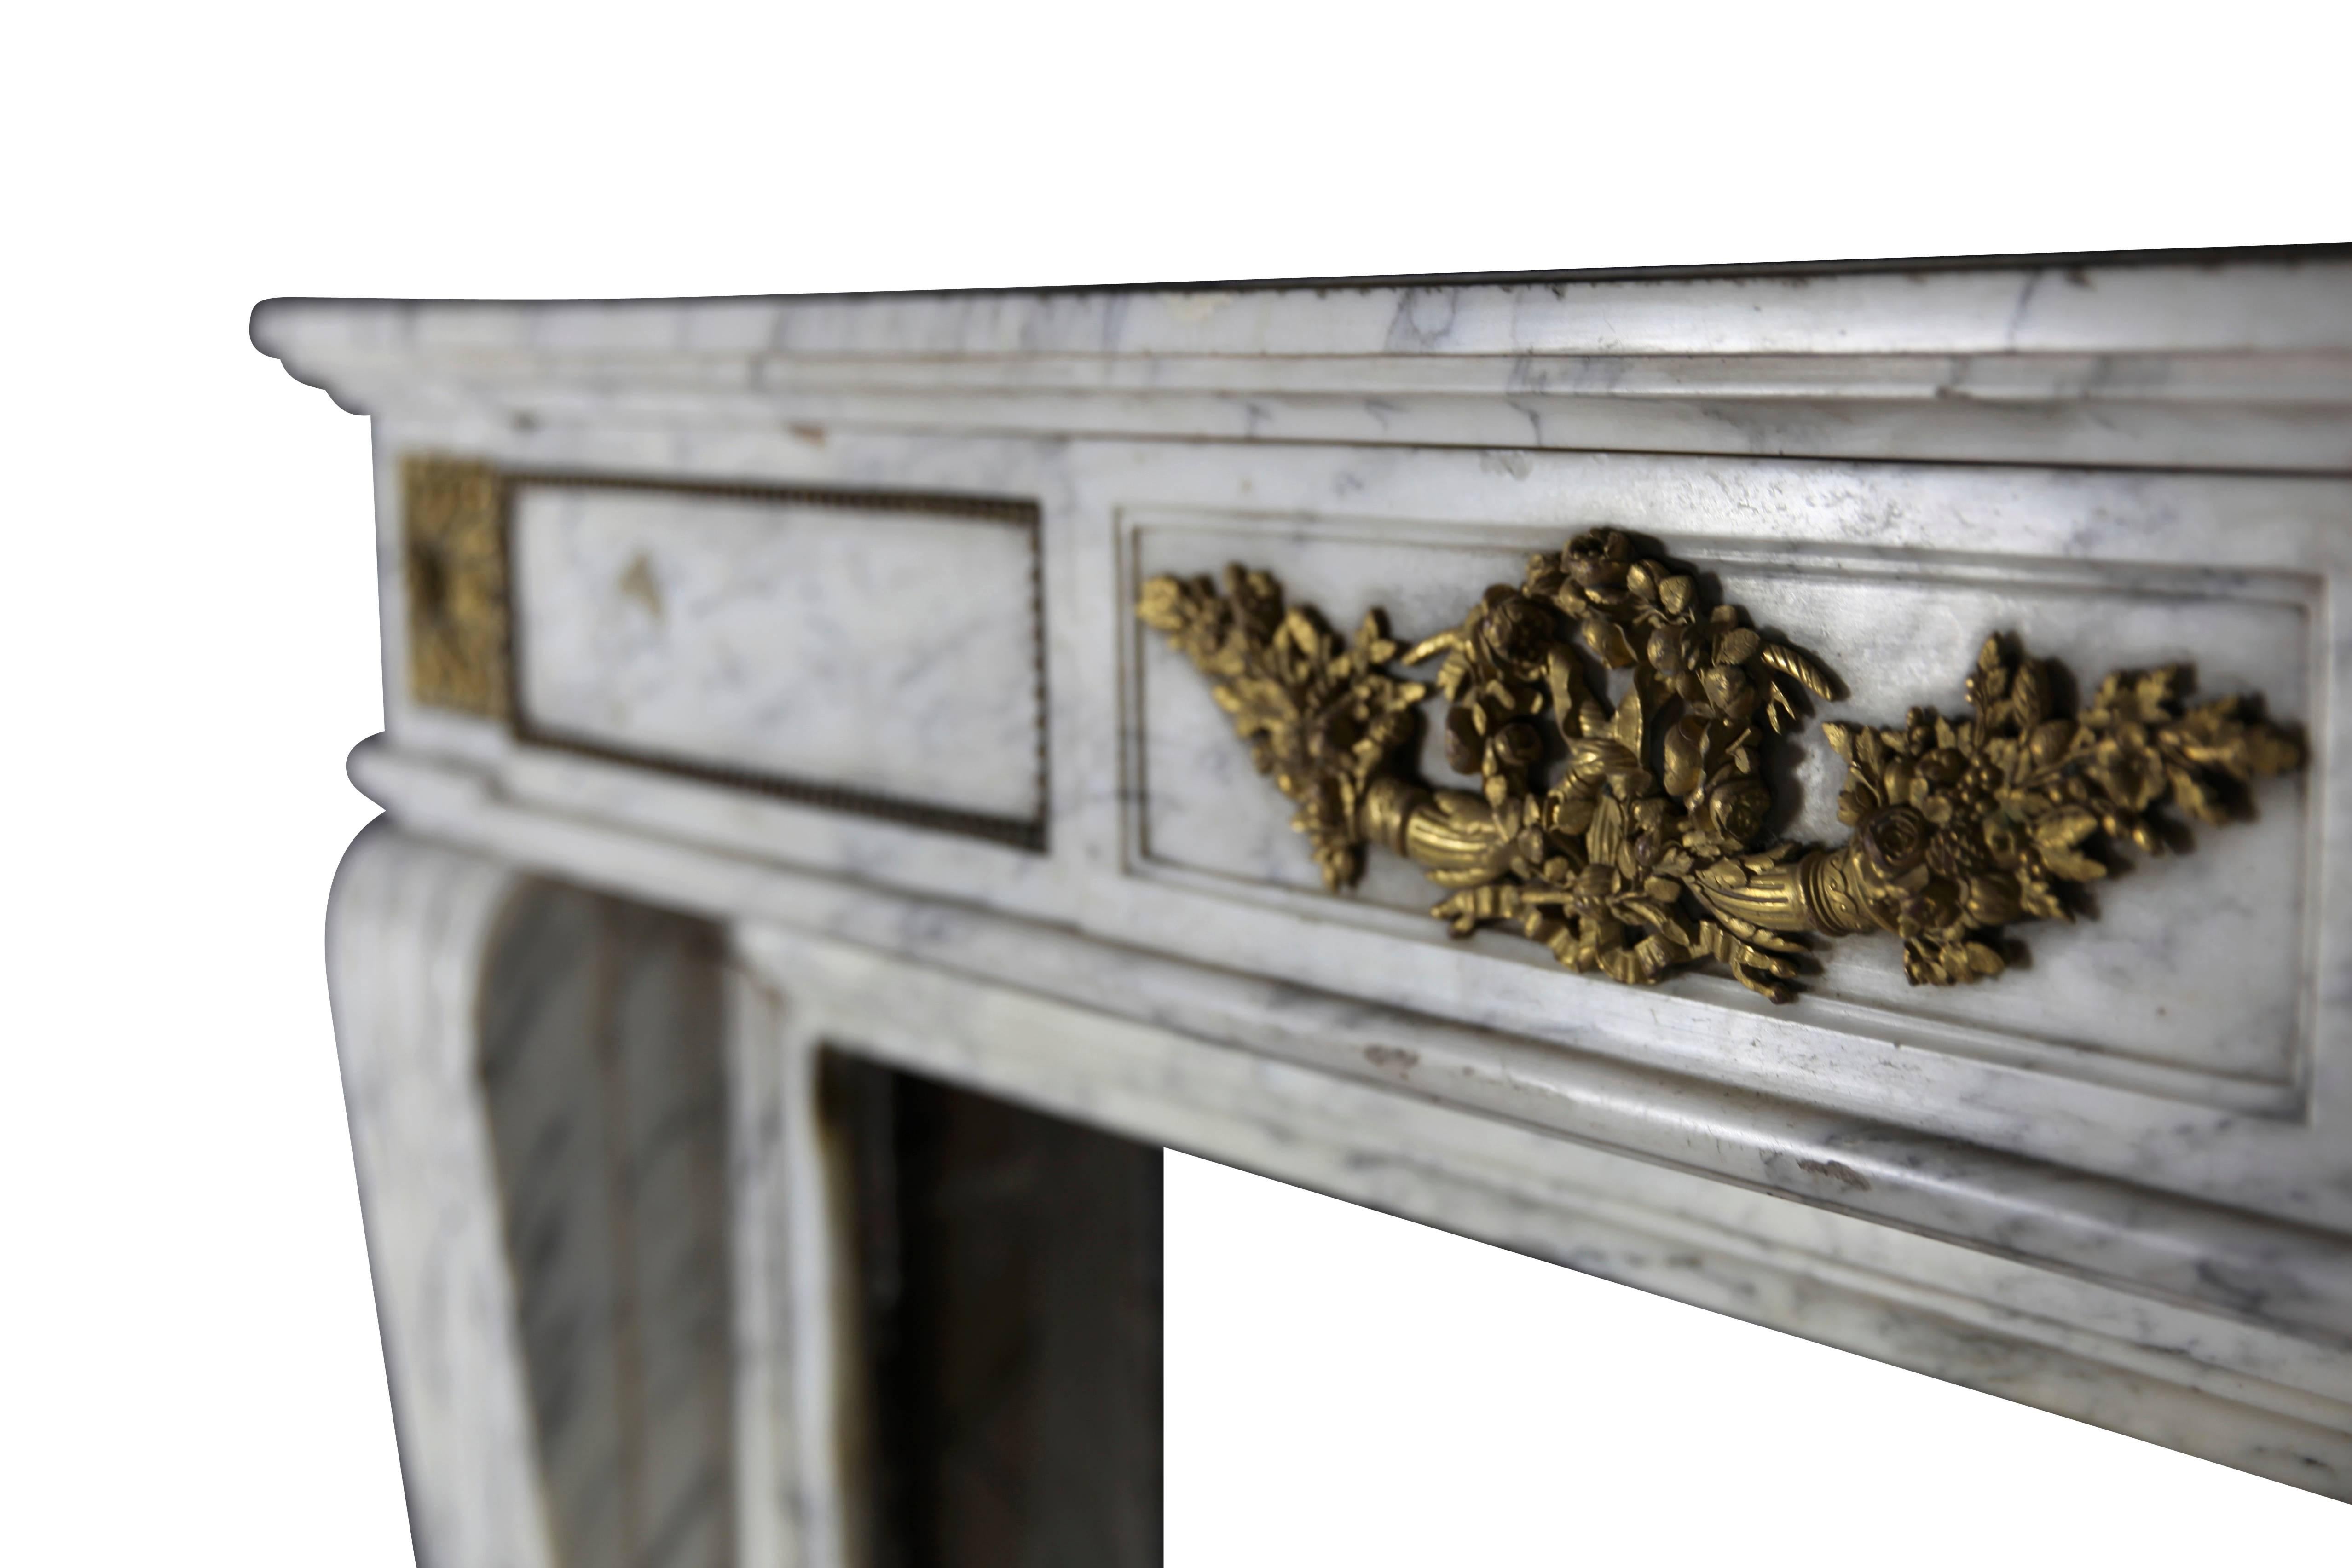 Original antique fireplace surround in white Carrara marble with original bijouterie in brass from the 19th century. A great element for a French classical interior. Louis XVI style.
Measures:
145 cm EW 57.08